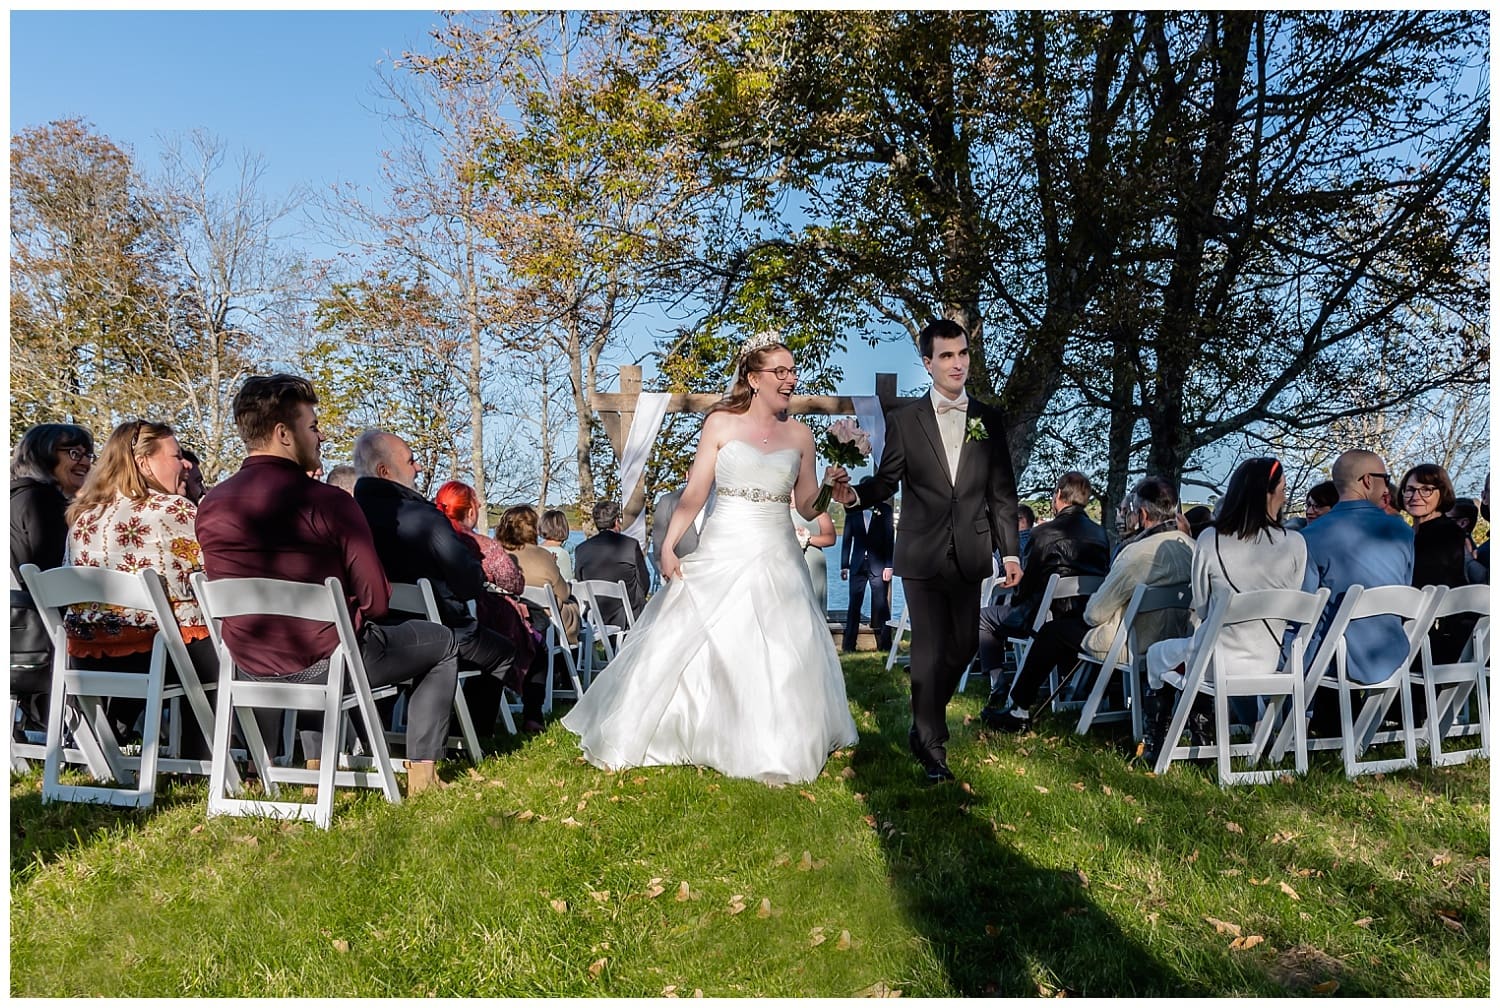 The bride and groom walk down the aisle after their wedding ceremony at the Kinley Farm in Lunenburg, NS.